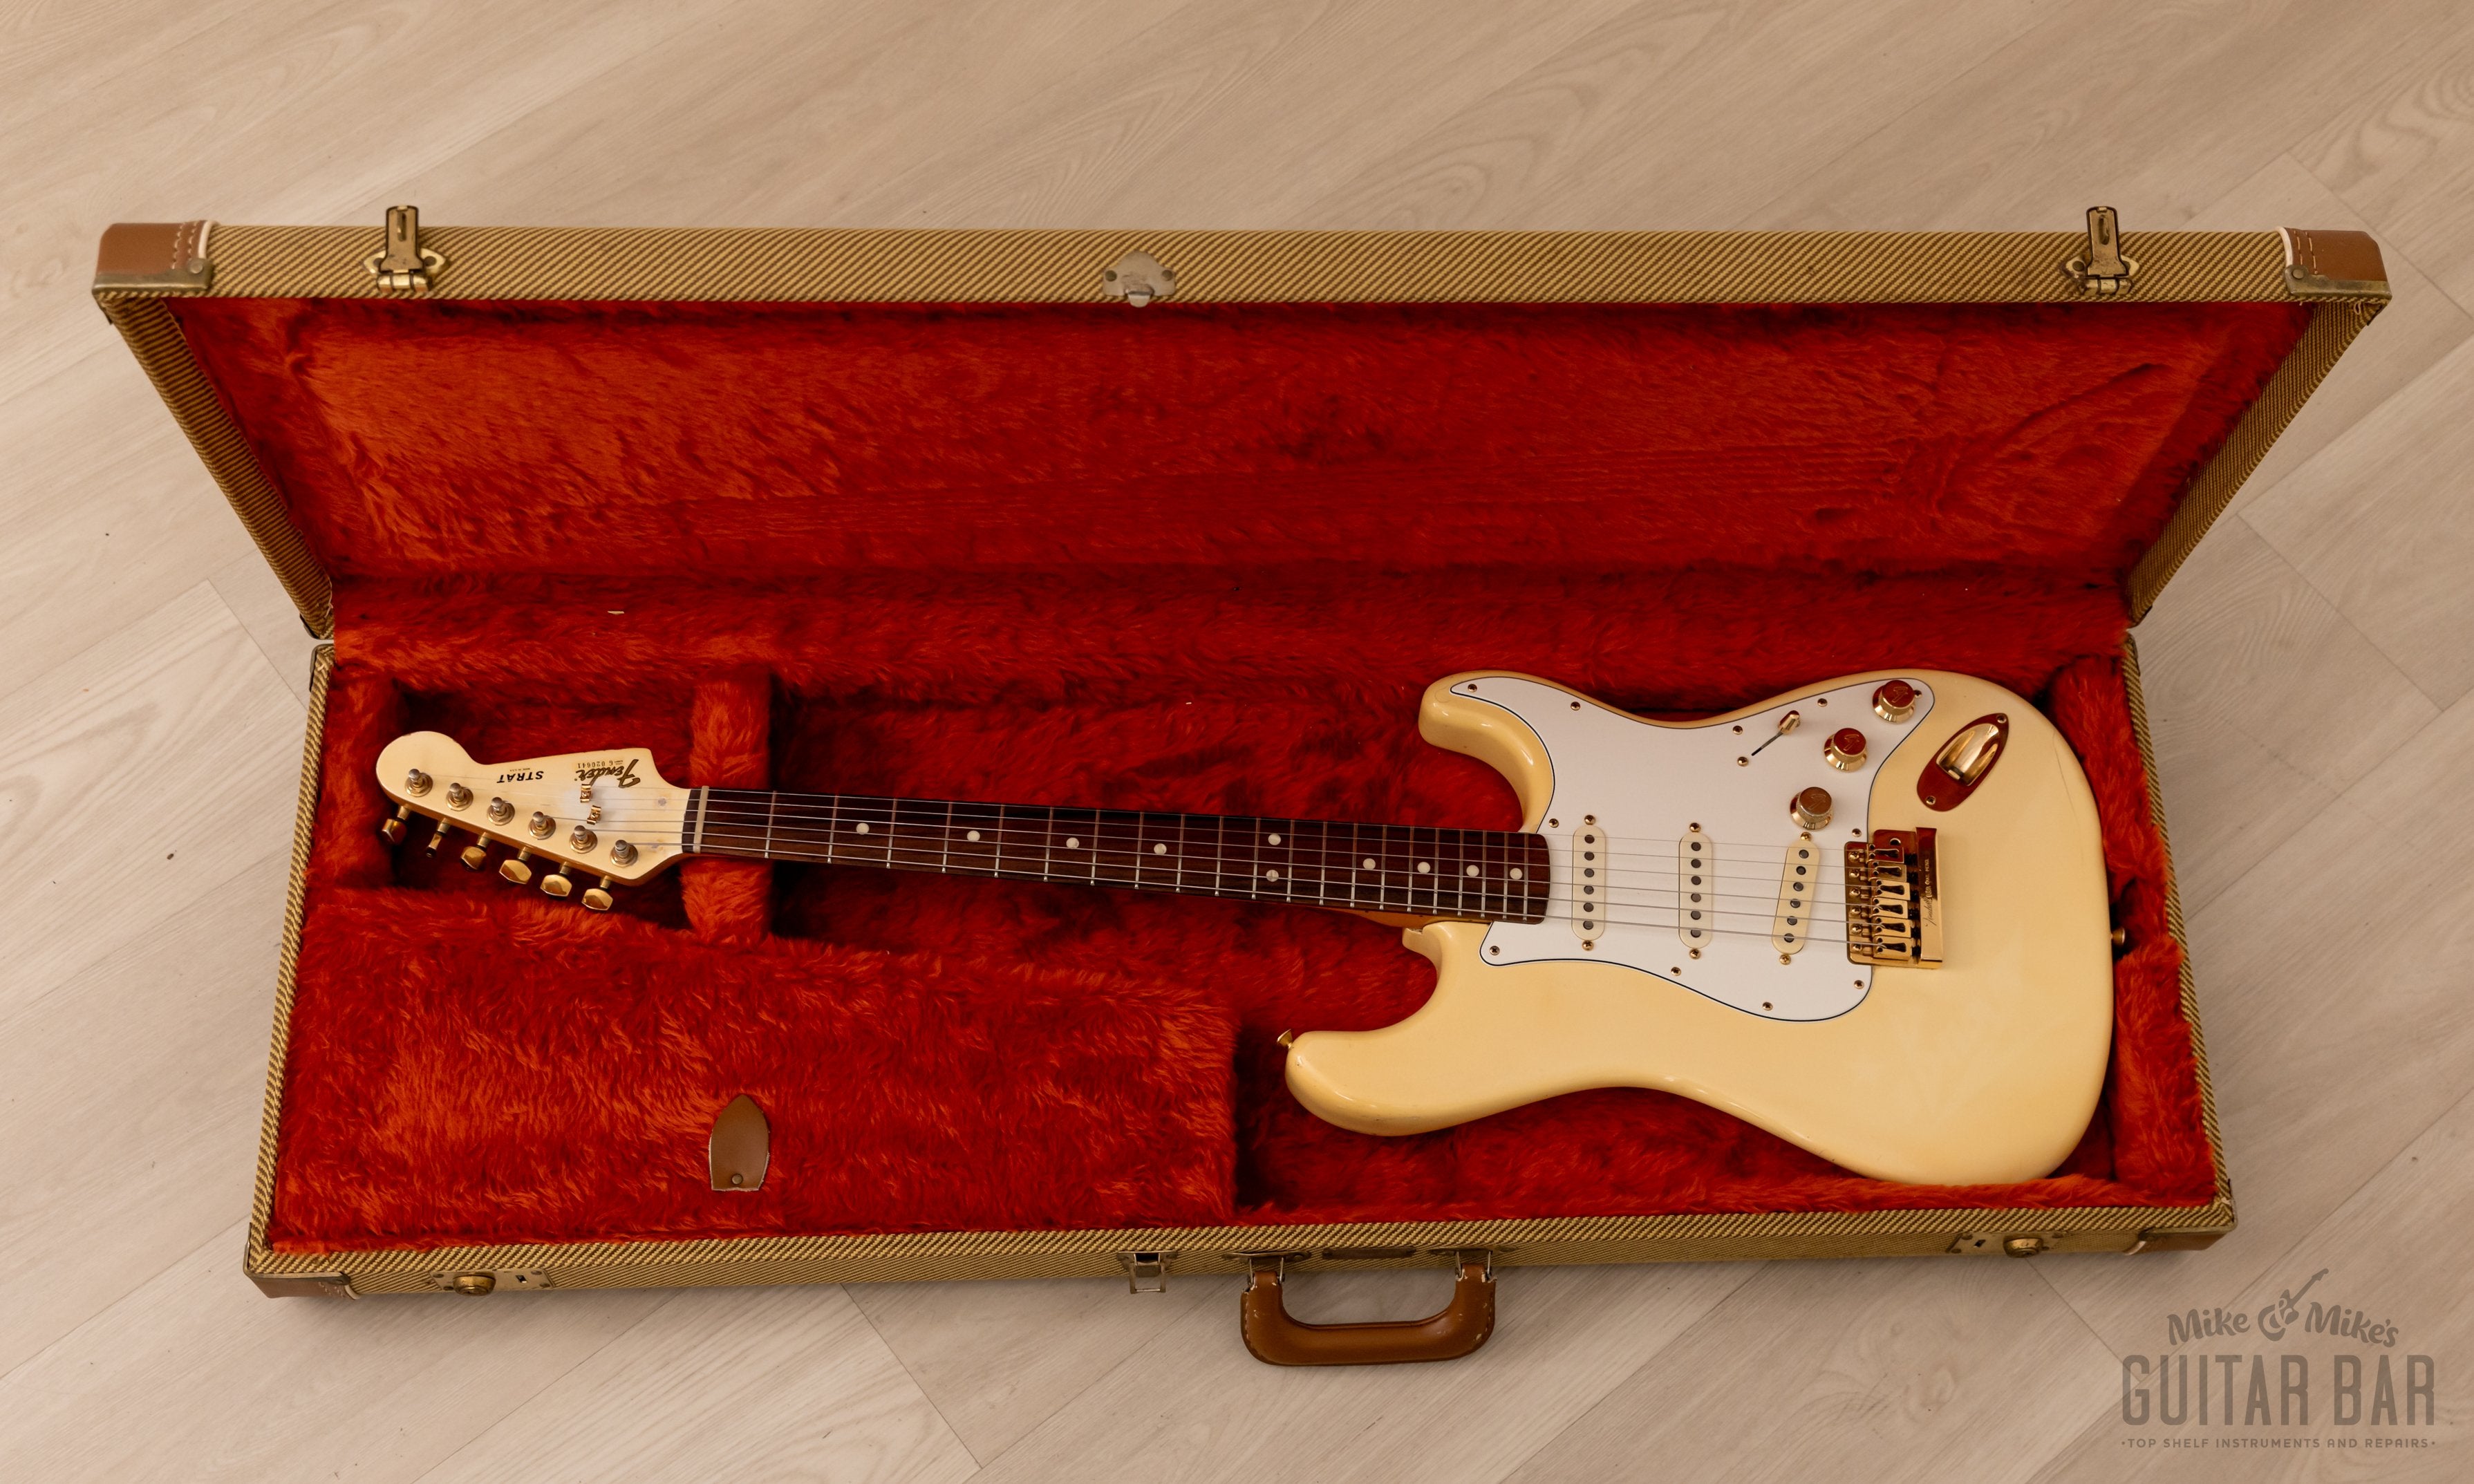 1981 Fender The Strat Dan Smith Stratocaster USA-Made, Olympic White w/ Gold Hardware, Case